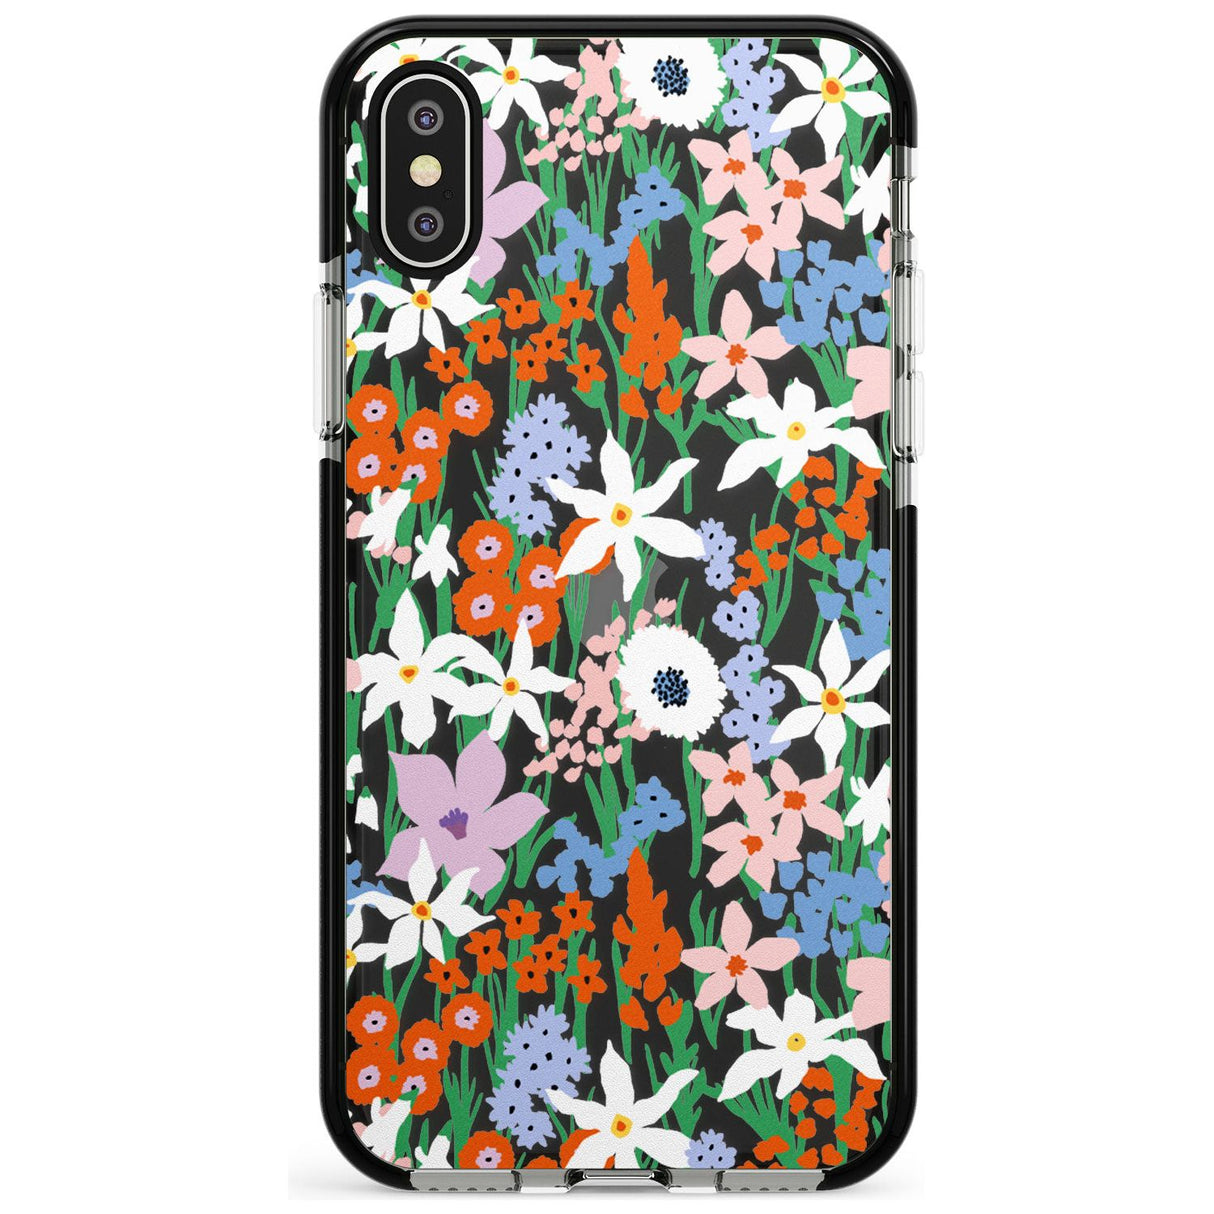 Springtime Meadow: Transparent Pink Fade Impact Phone Case for iPhone X XS Max XR